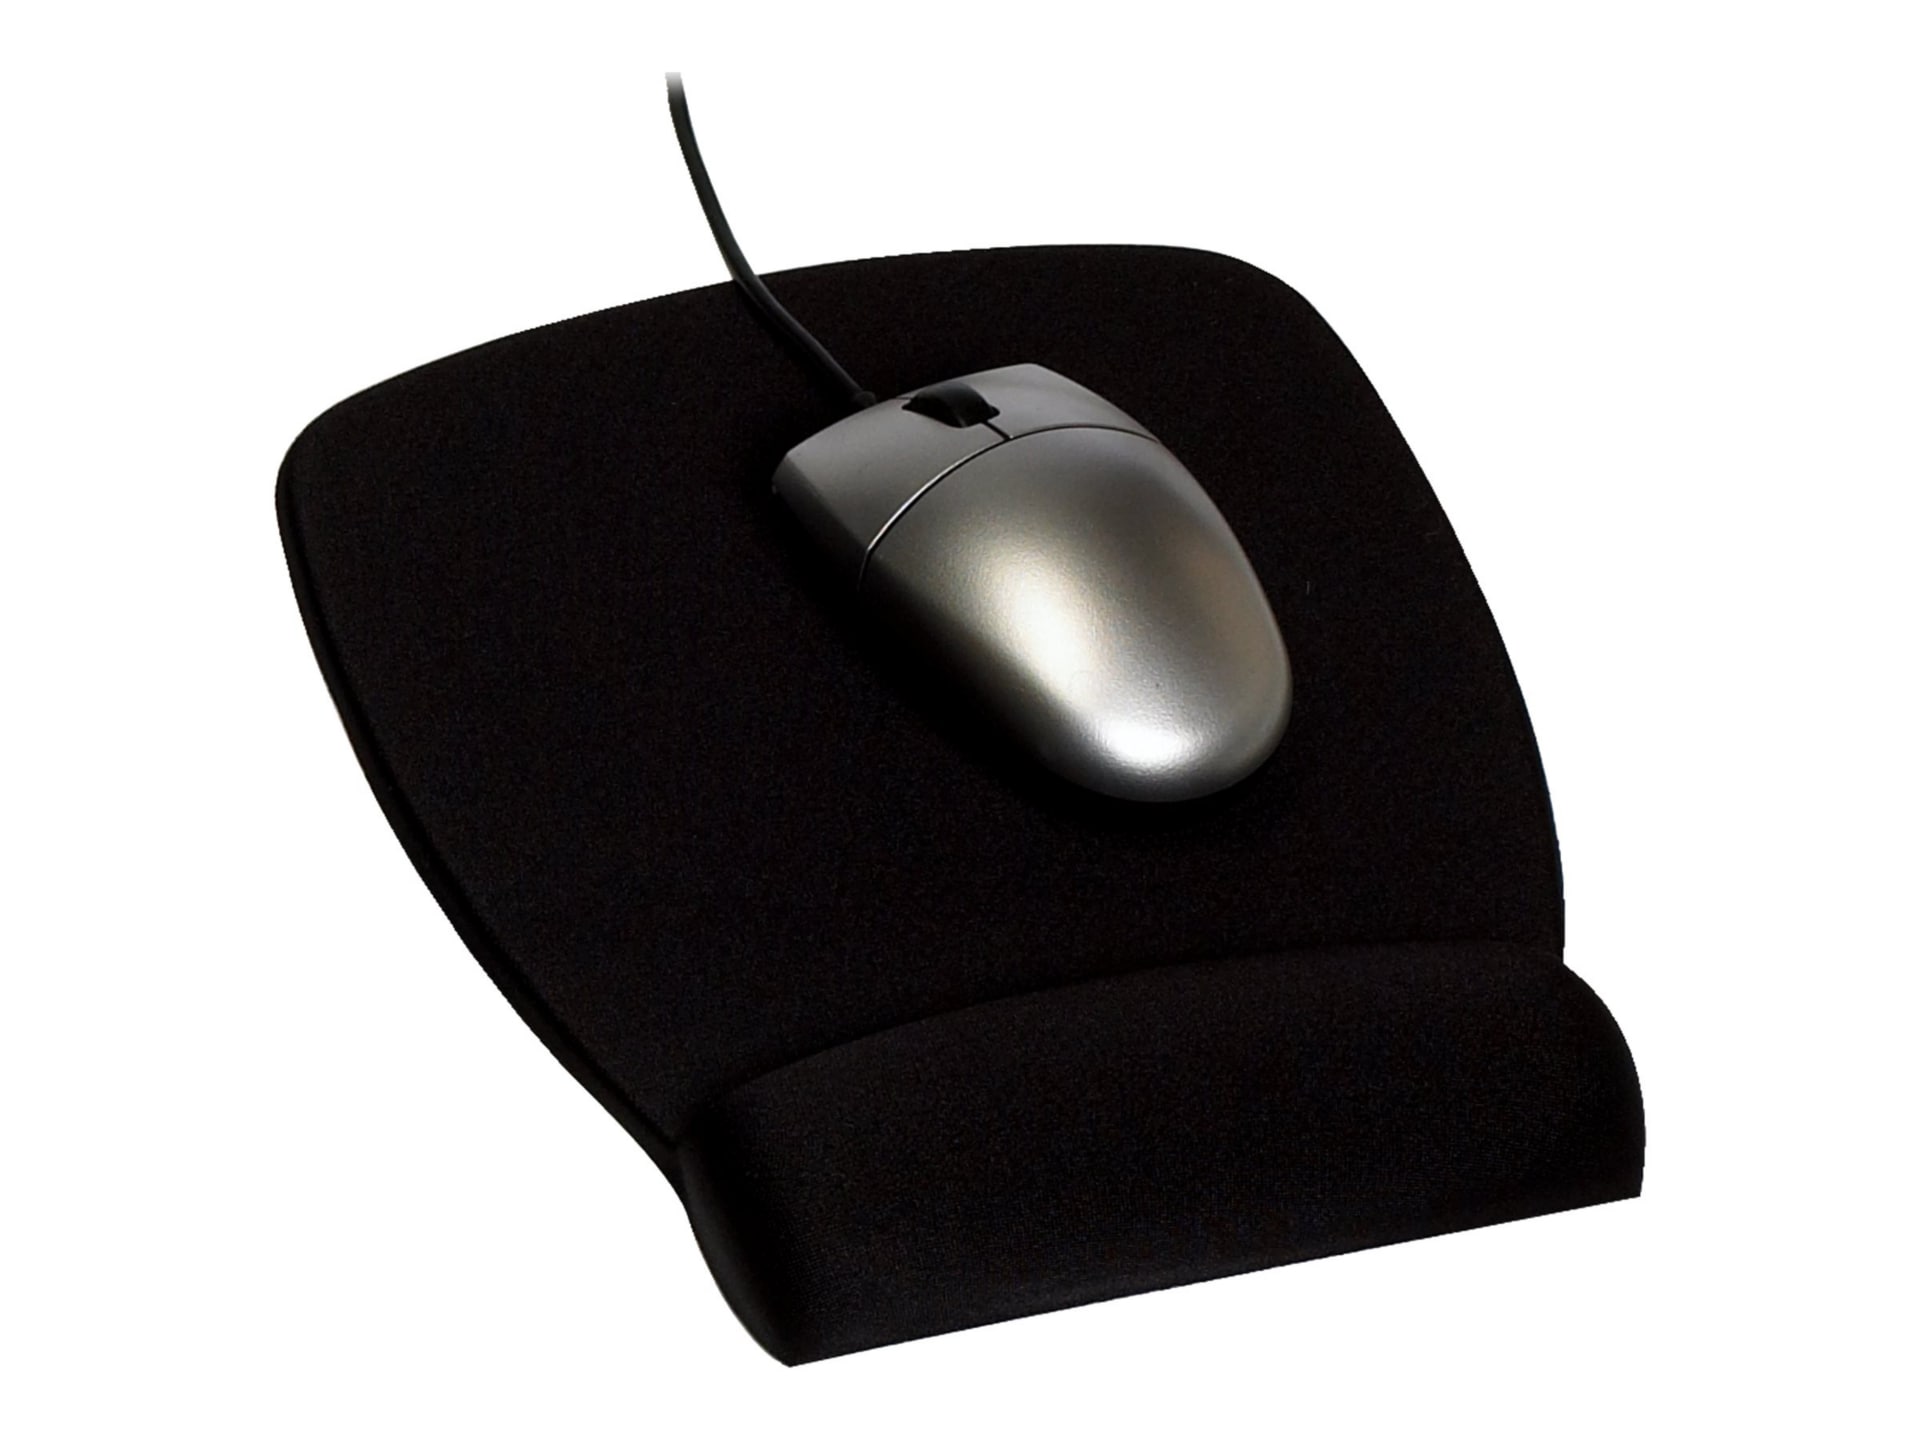 3M Foam Mouse Pad Wrist Rest with Antimicrobial Product Protection